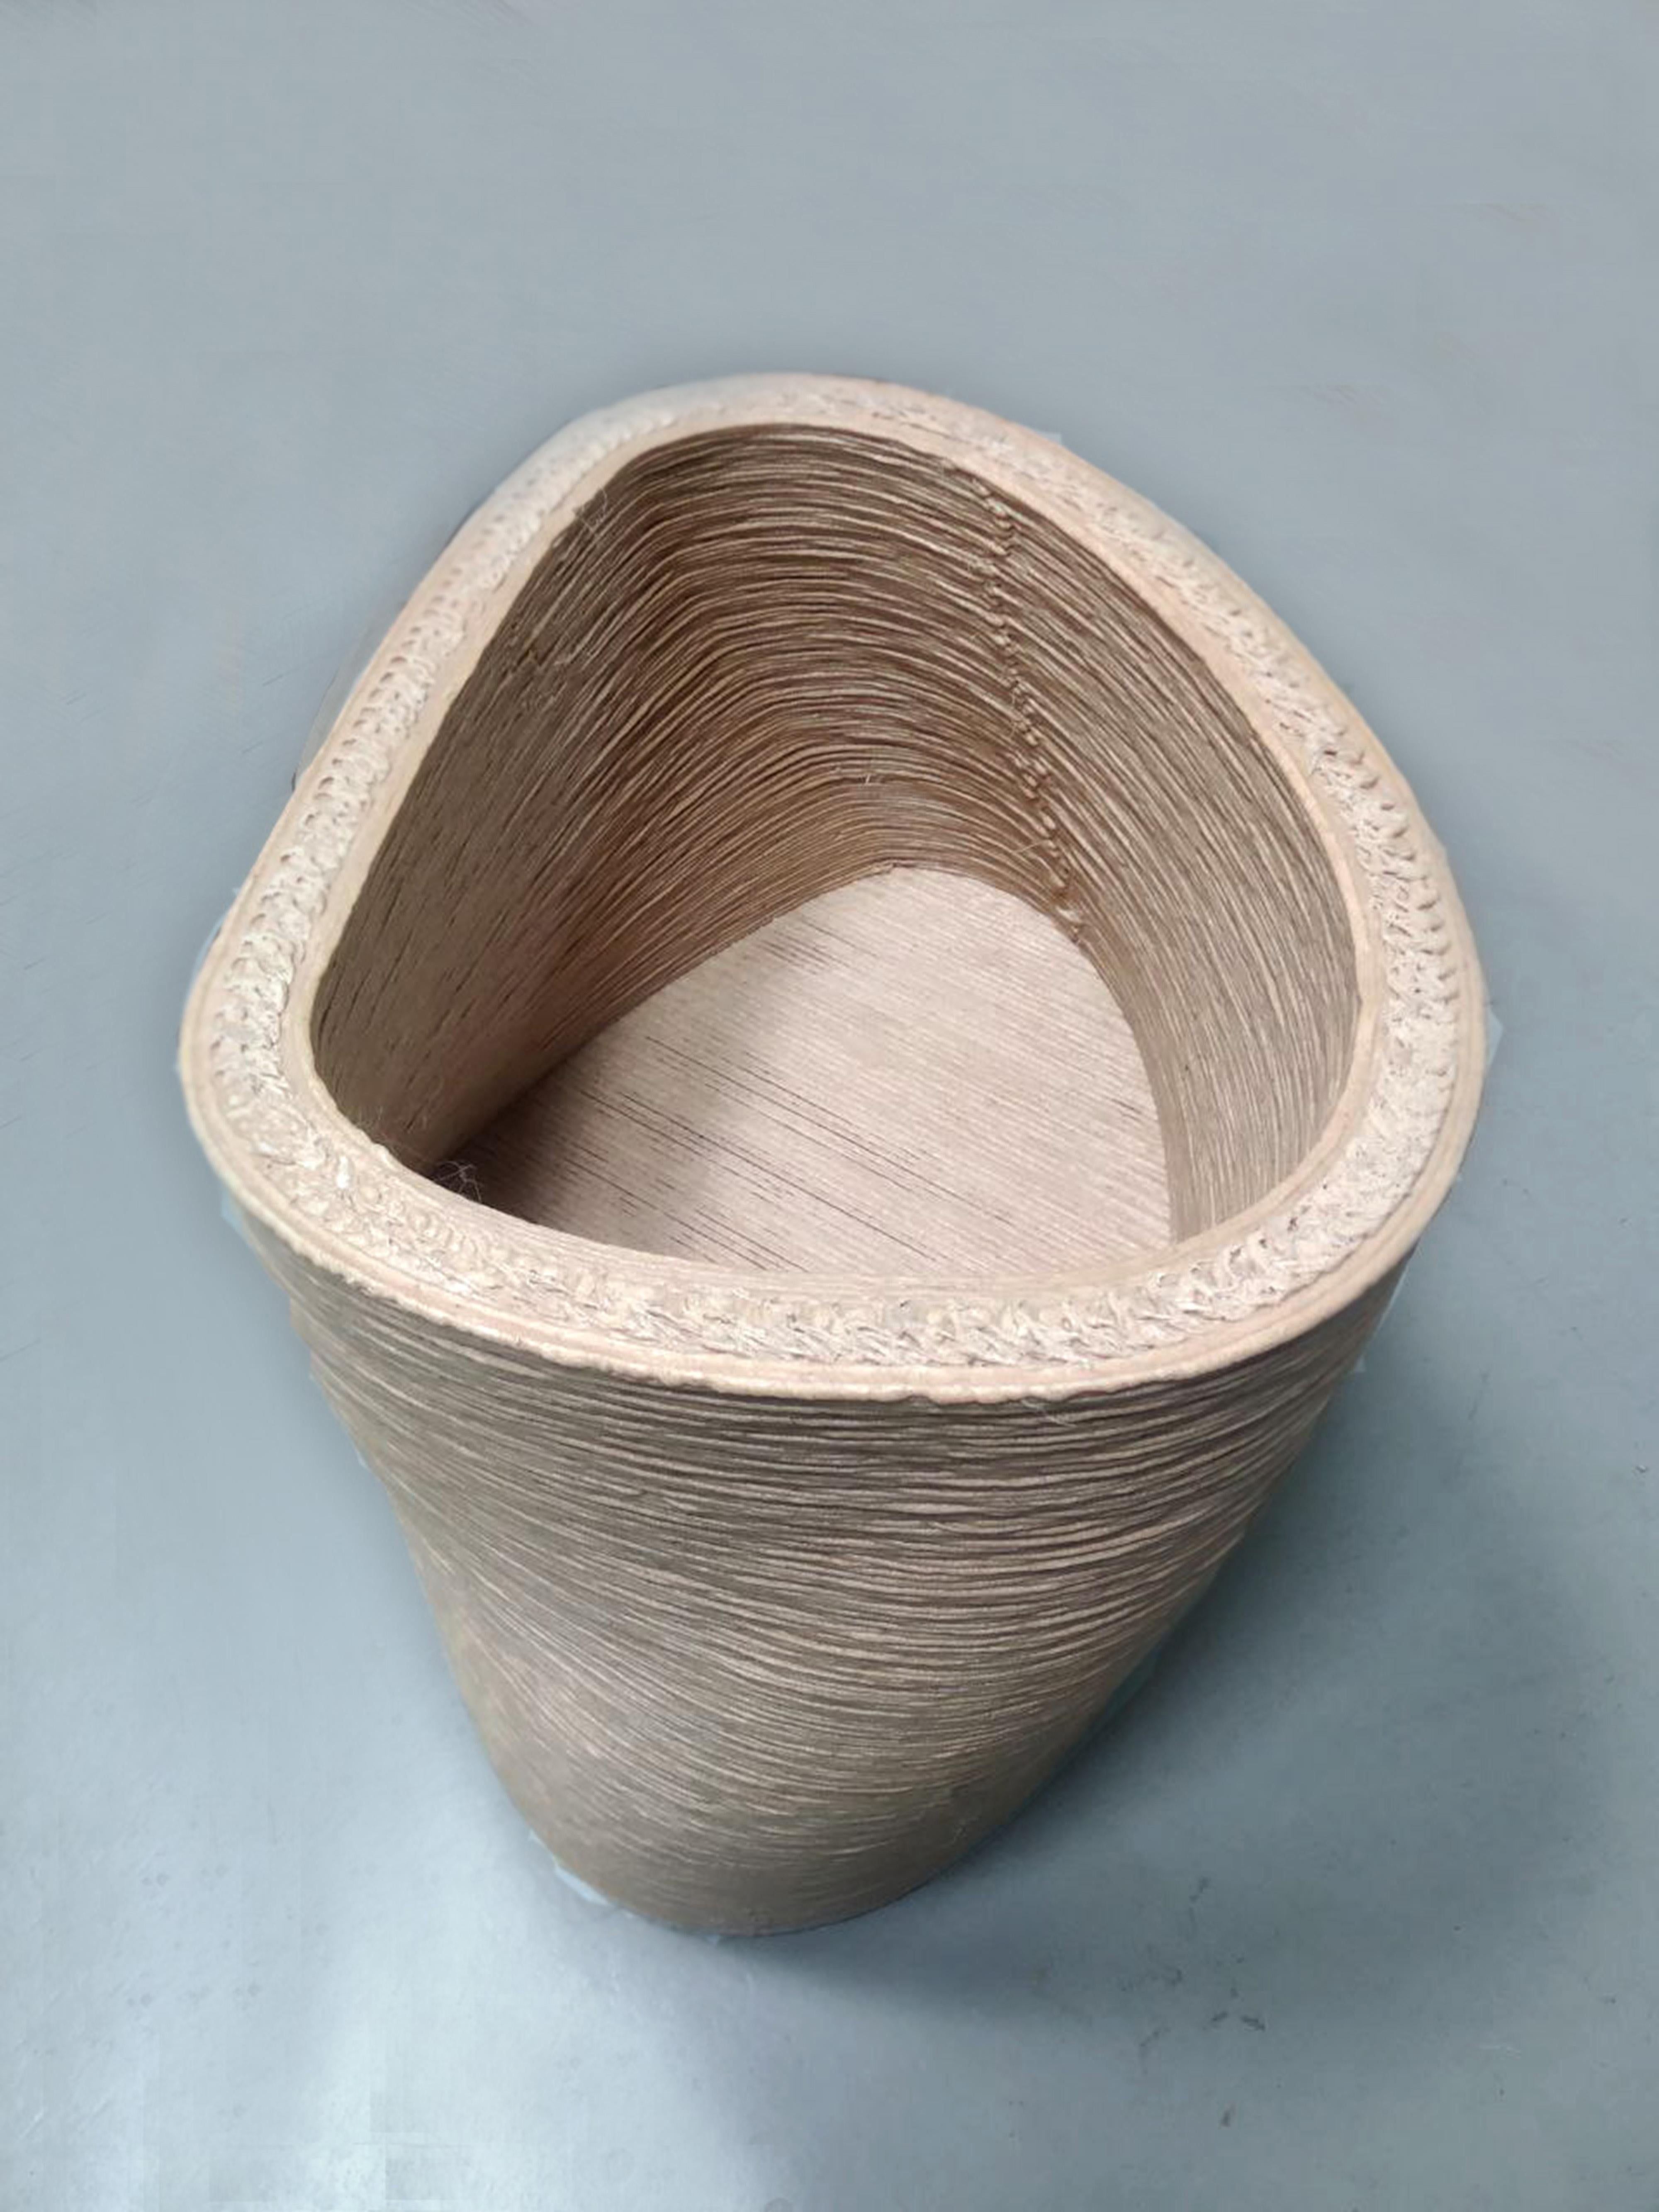 Contemporary Swivel, Stool and Planter, 3D Printed Fermented Sugar and Wood Fibre Mix For Sale